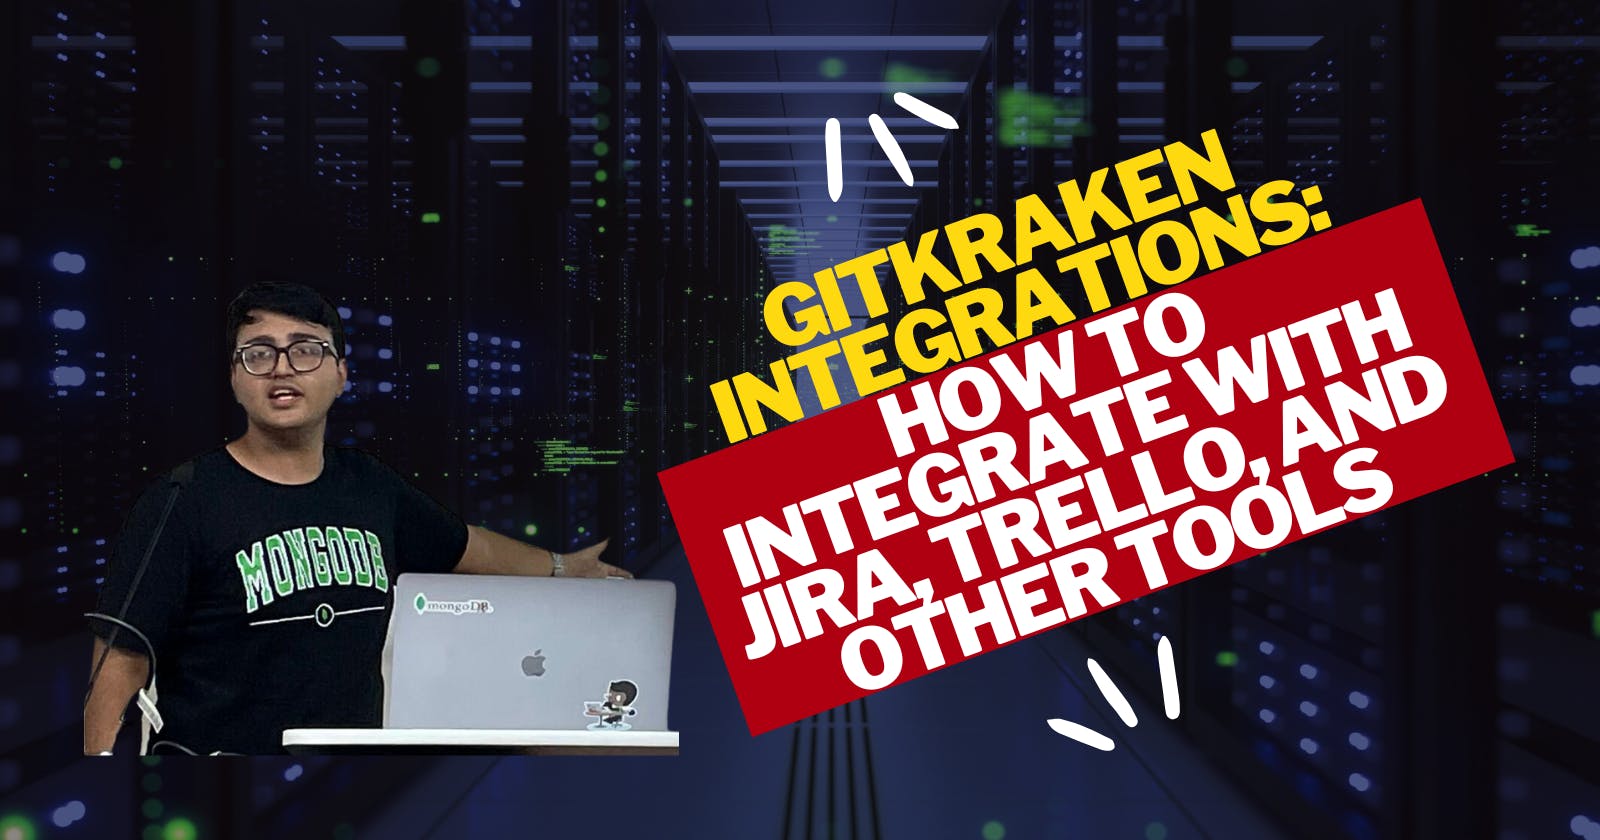 GitKraken Integrations: How to Integrate with Jira, Trello, and Other Tools